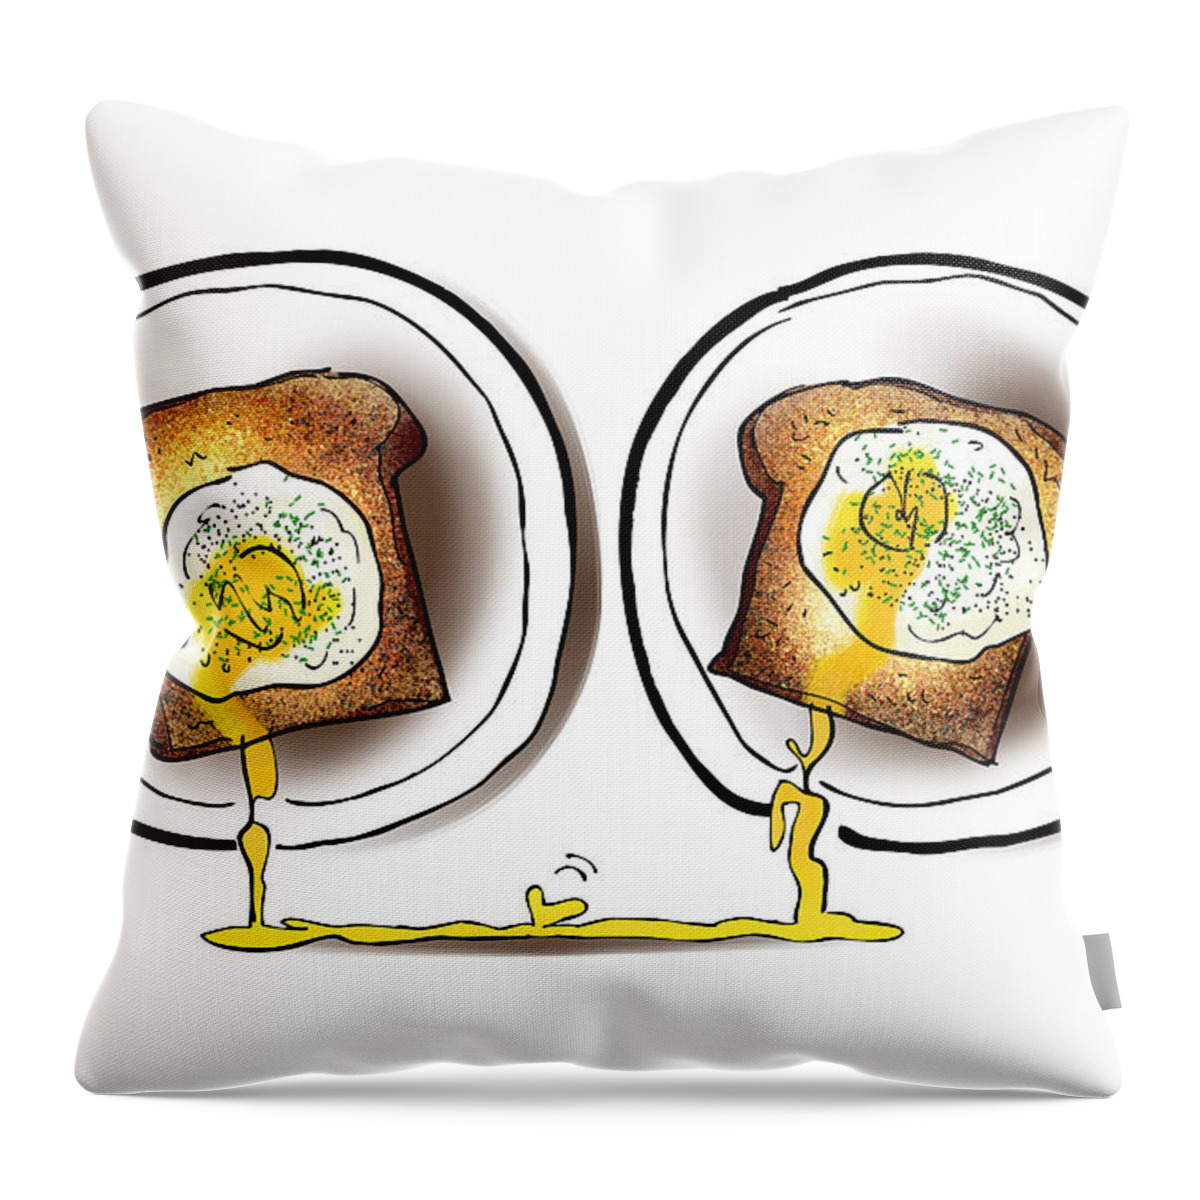 Love Throw Pillow featuring the digital art Poached Egg Love by Mark Armstrong